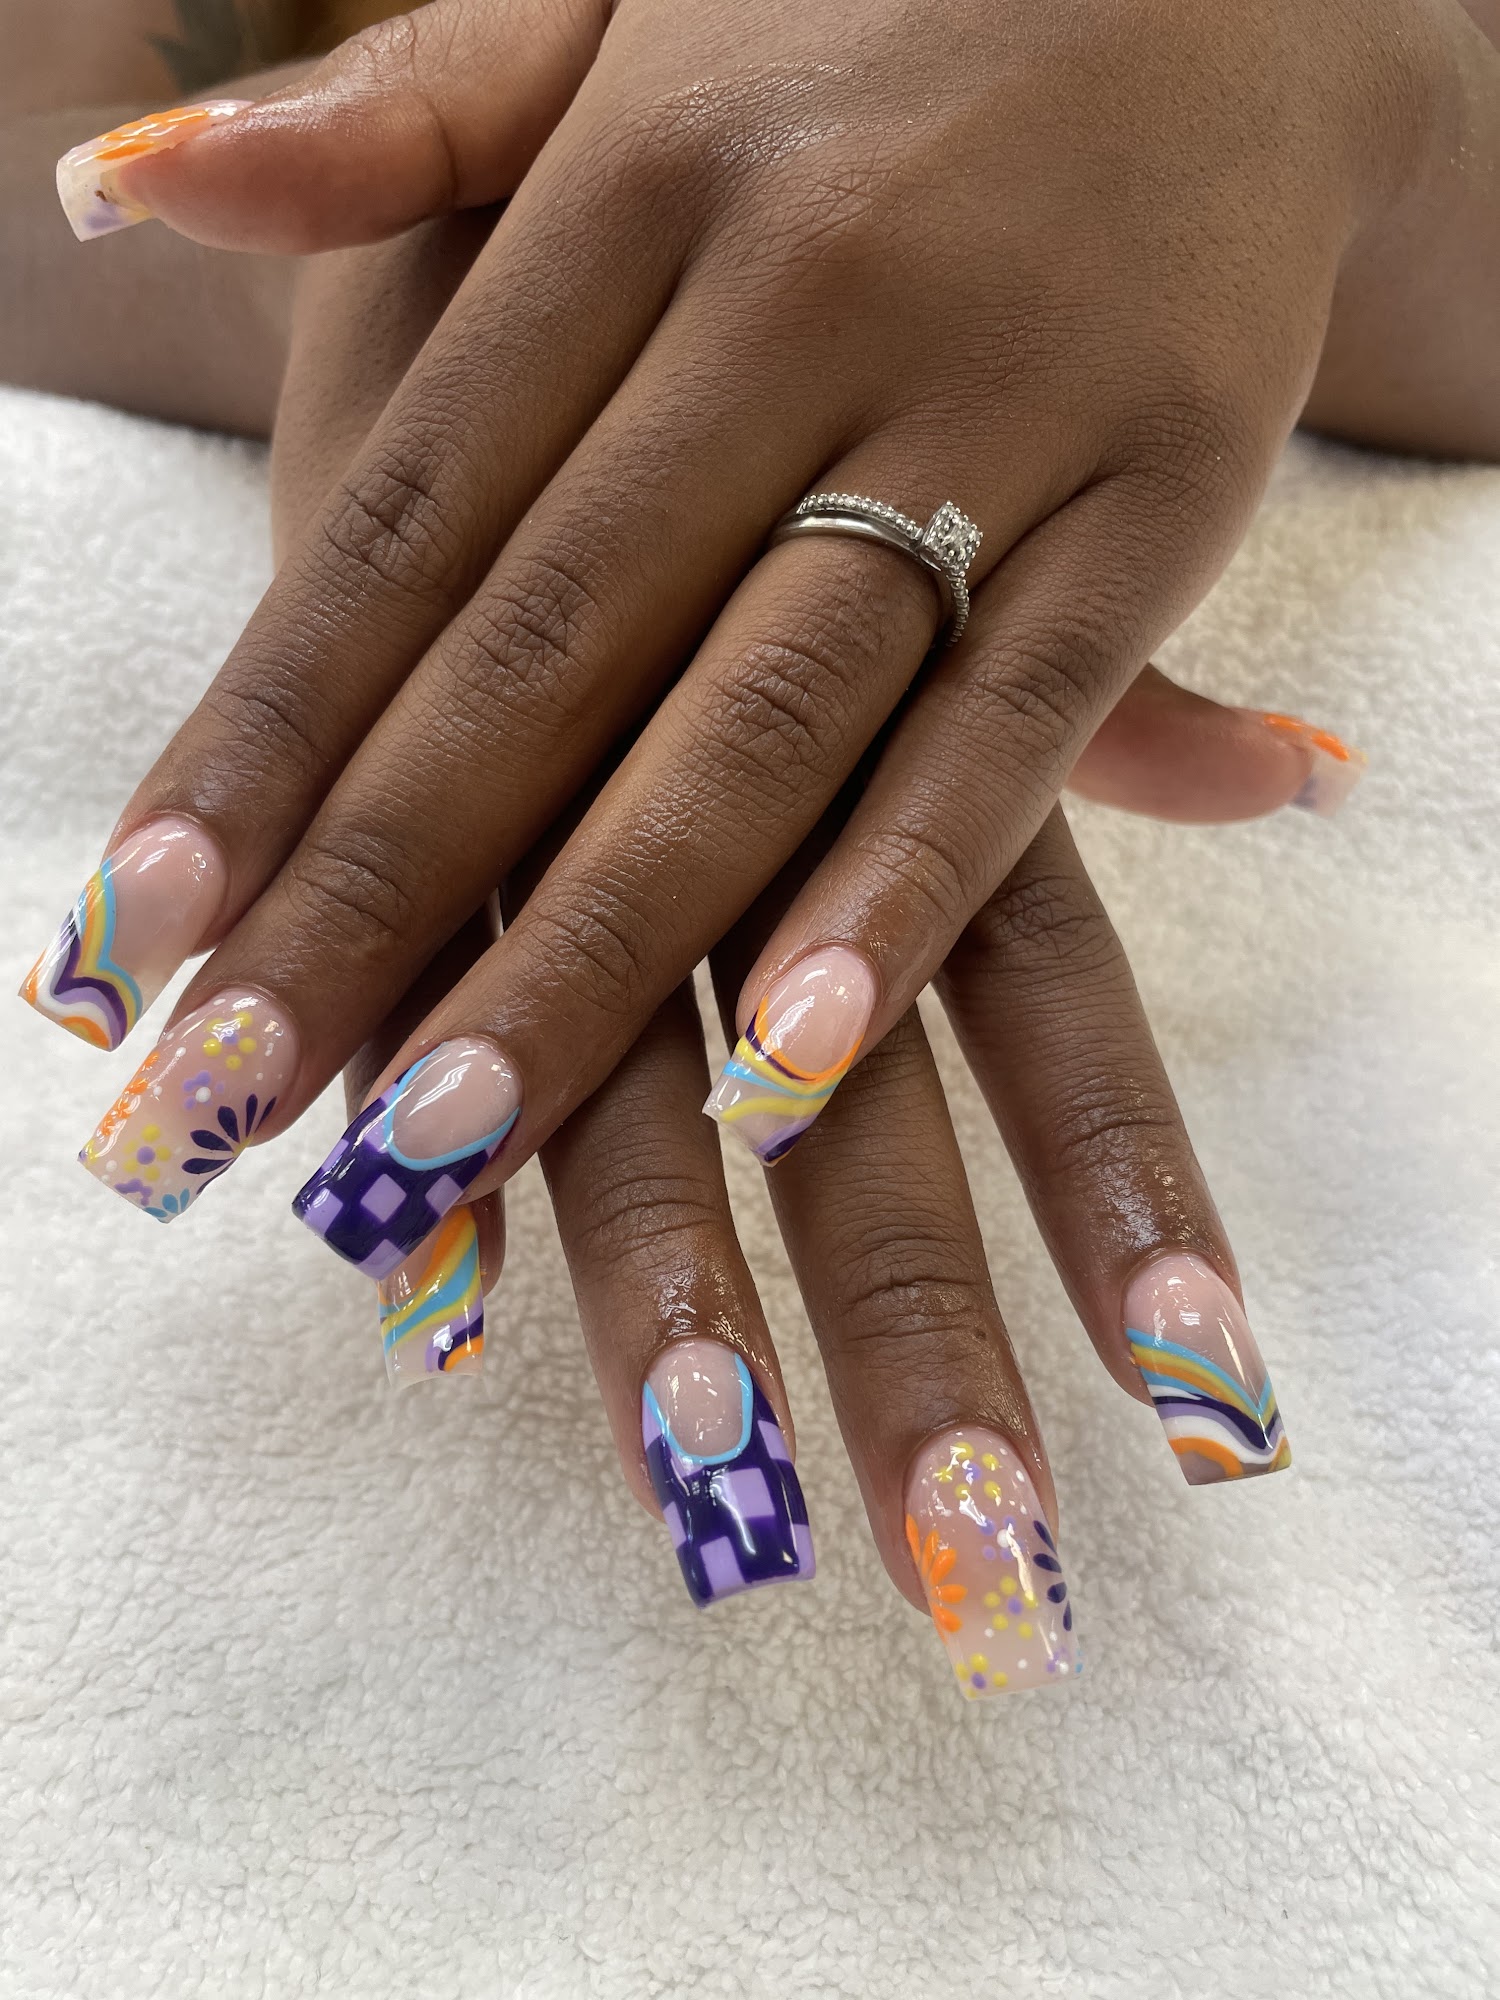 A D Nails Spa 16 N Virginia Ave # B, Penns Grove New Jersey 08069